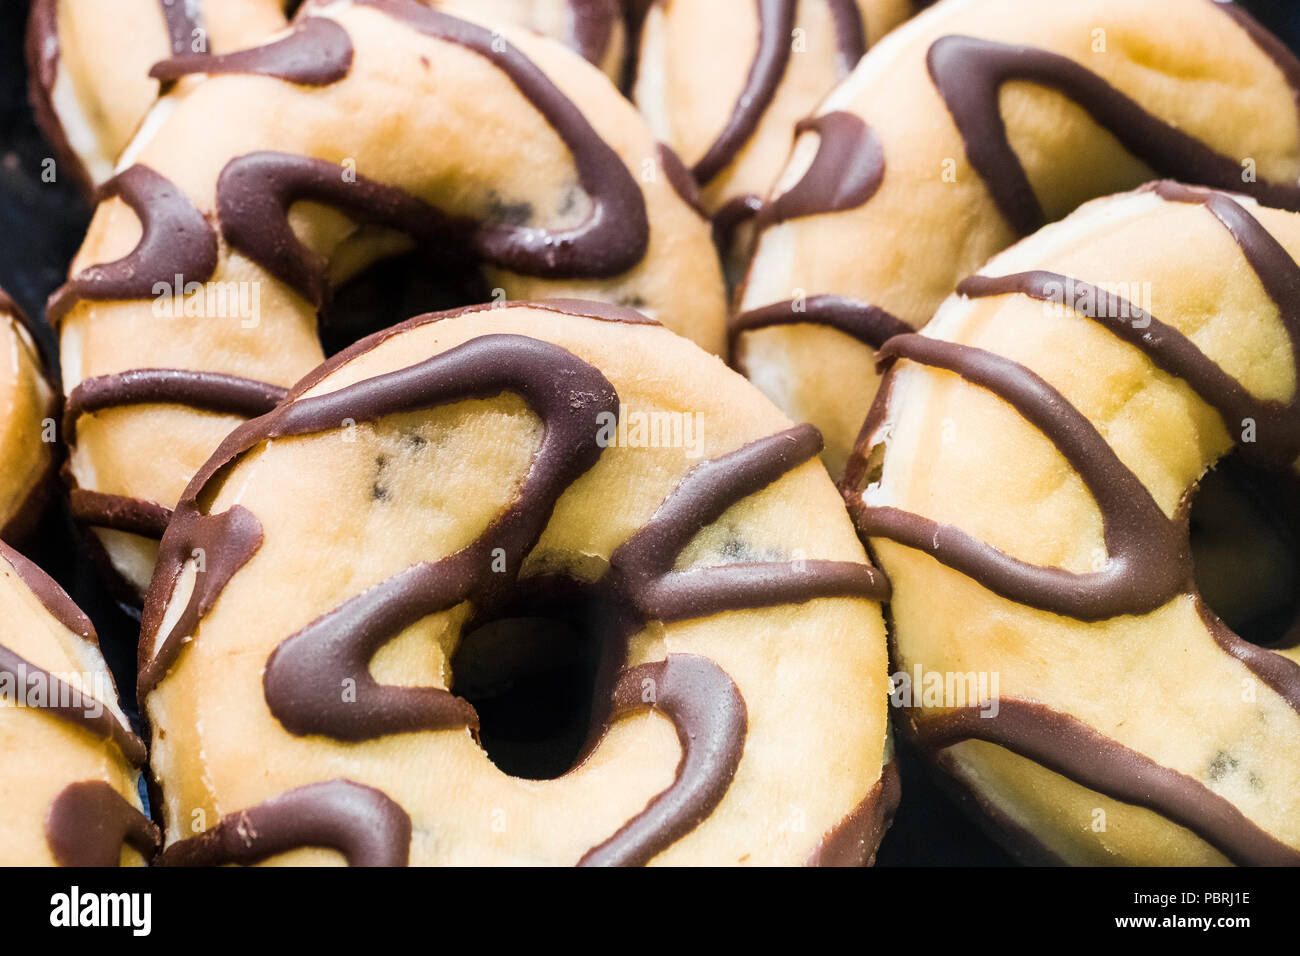 Many delicious sweet chocolate donuts in the bakery Stock Photo